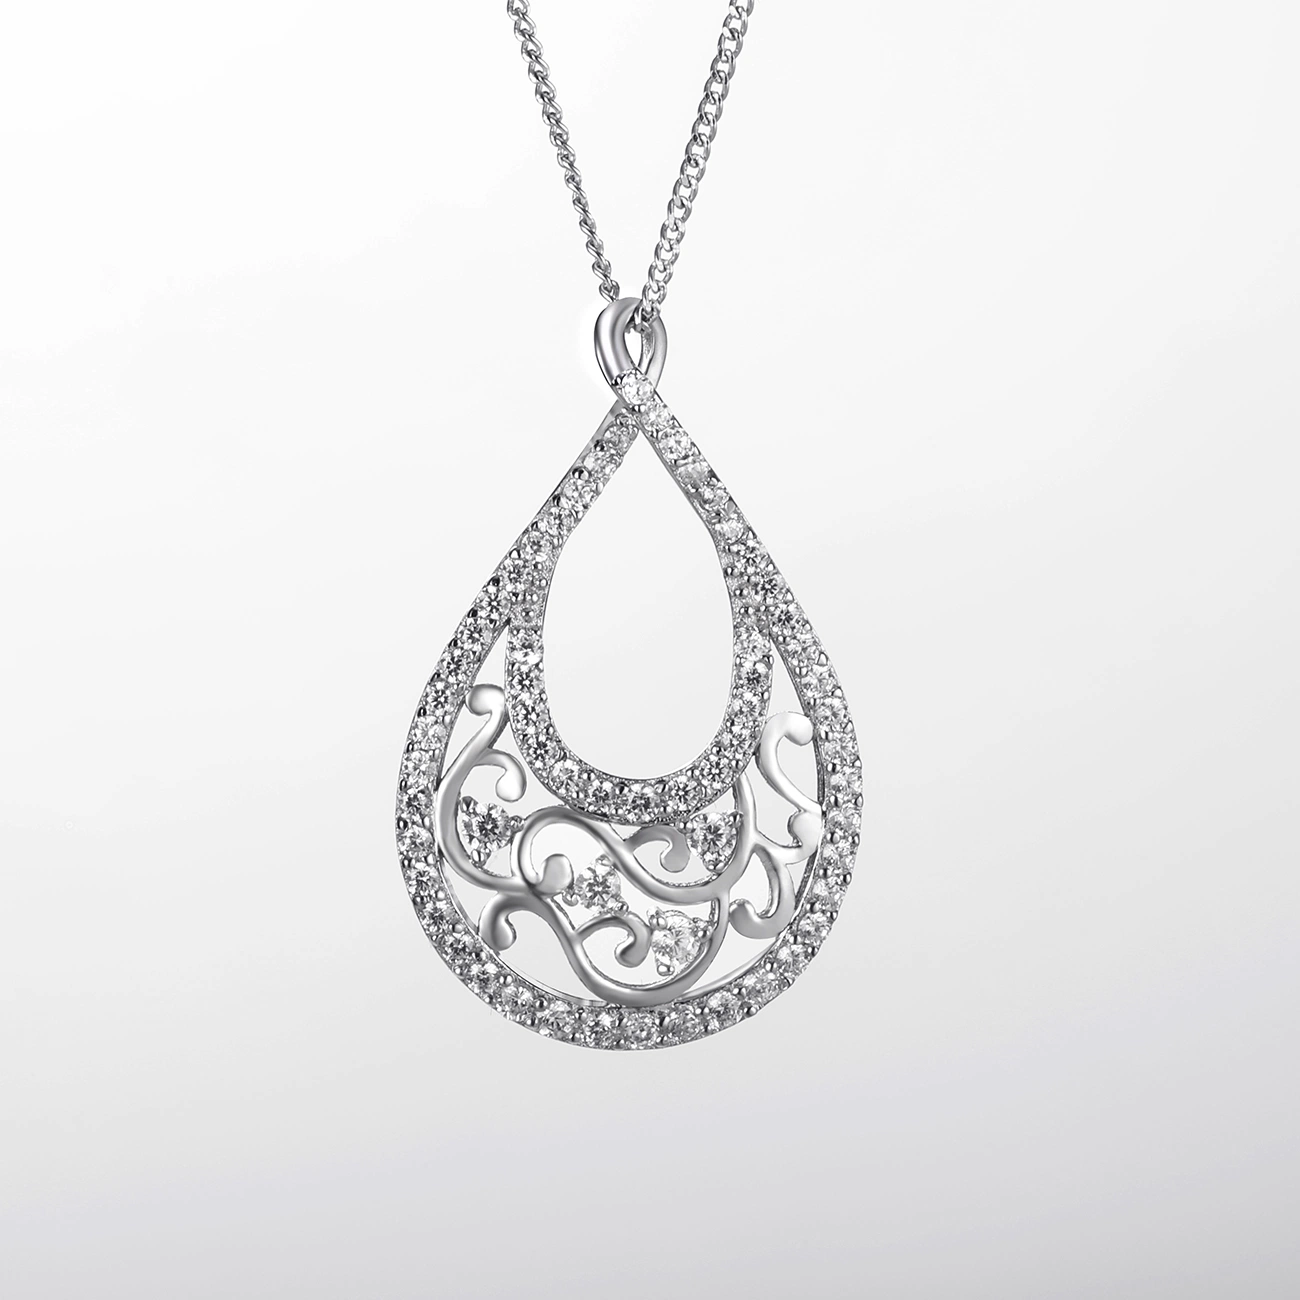 Factory Price Jewelry 925 Sterling Silver Pendant with Cubic Zirconia